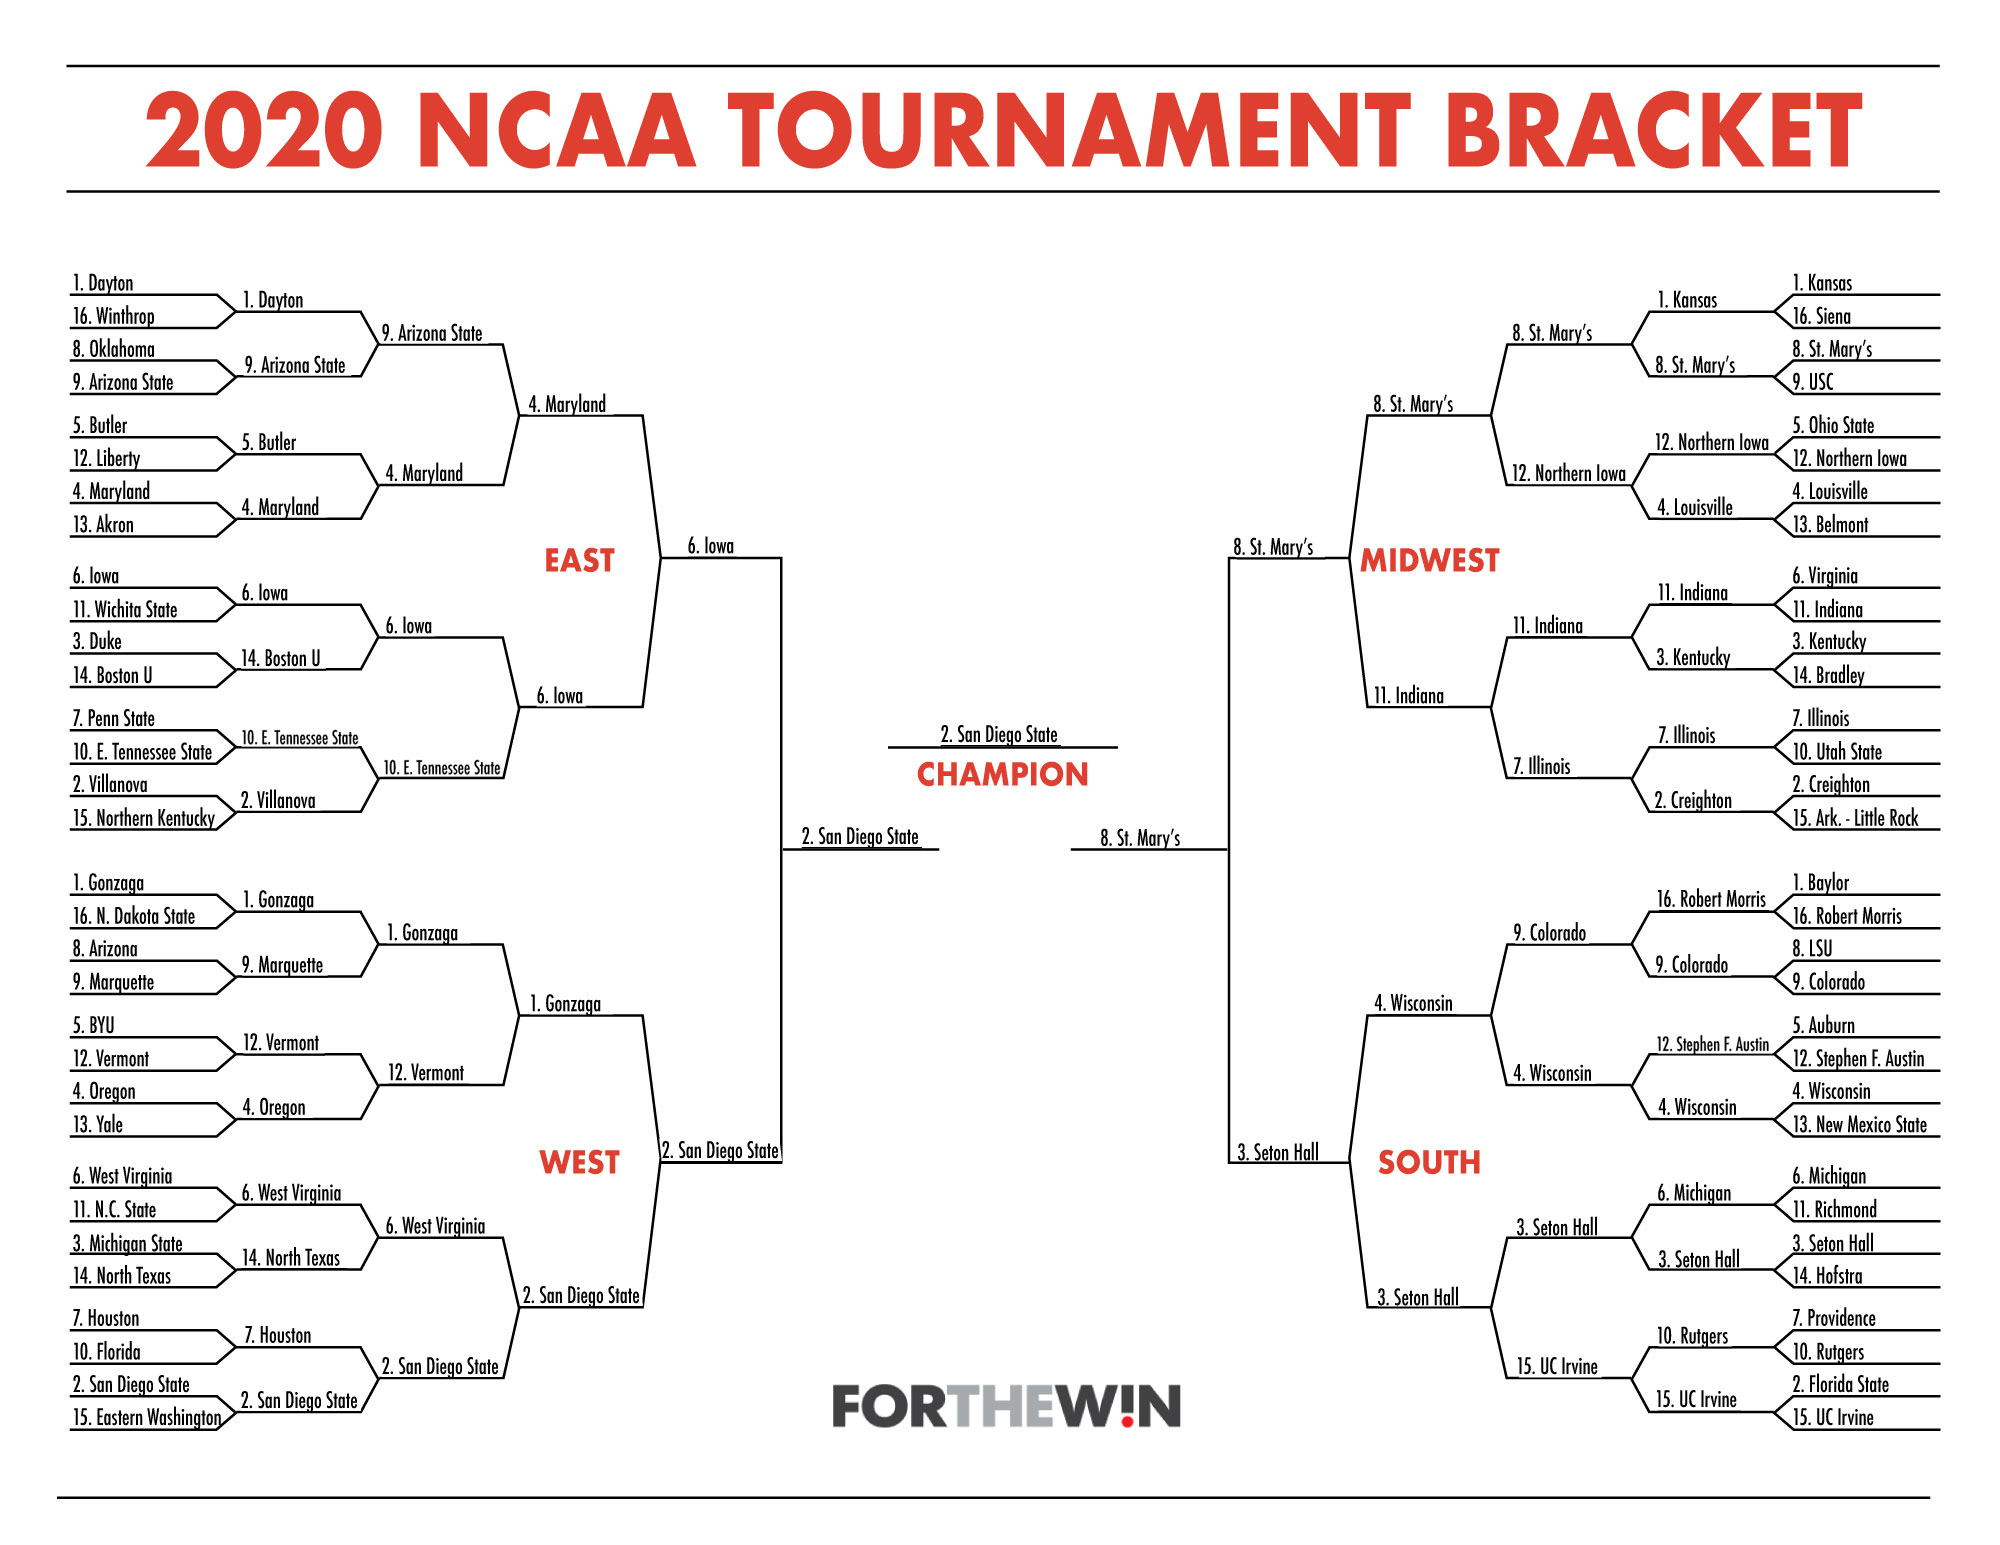 San Diego State is your 2020 NCAA Tournament Bracket champion For The Win